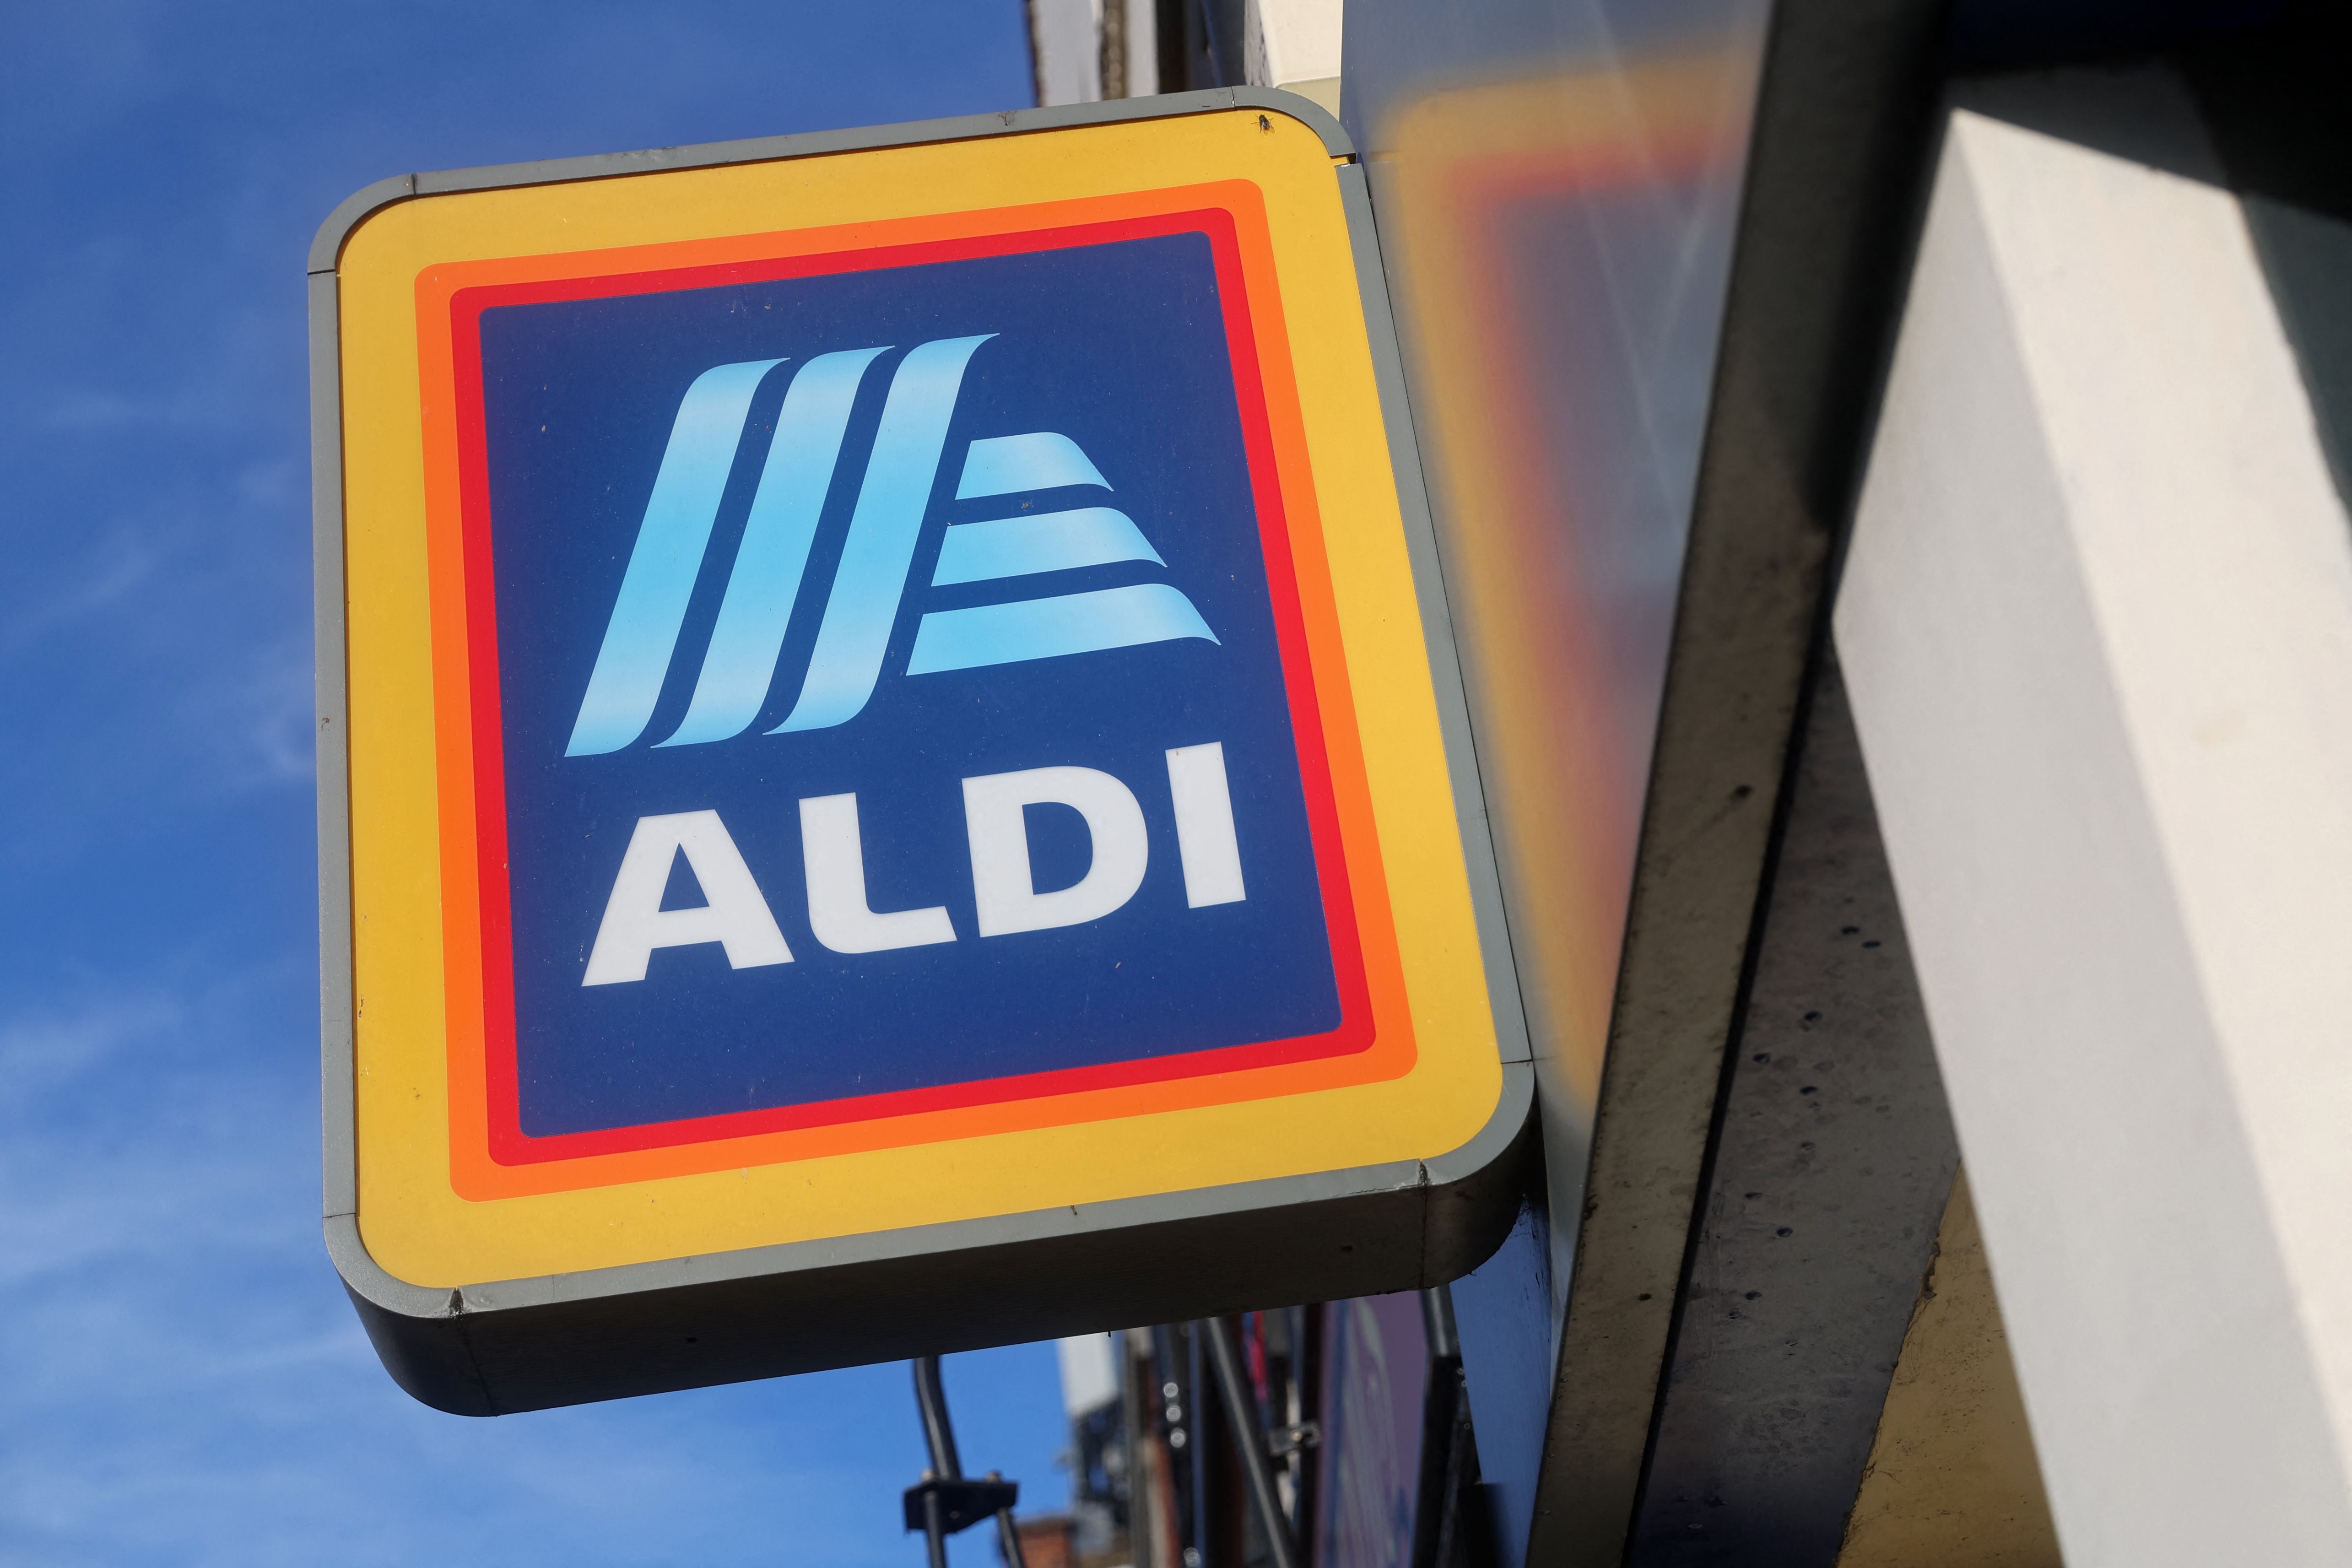 The recall affects Aldi’s deli meats that may contain milk which isn’t declared on the label